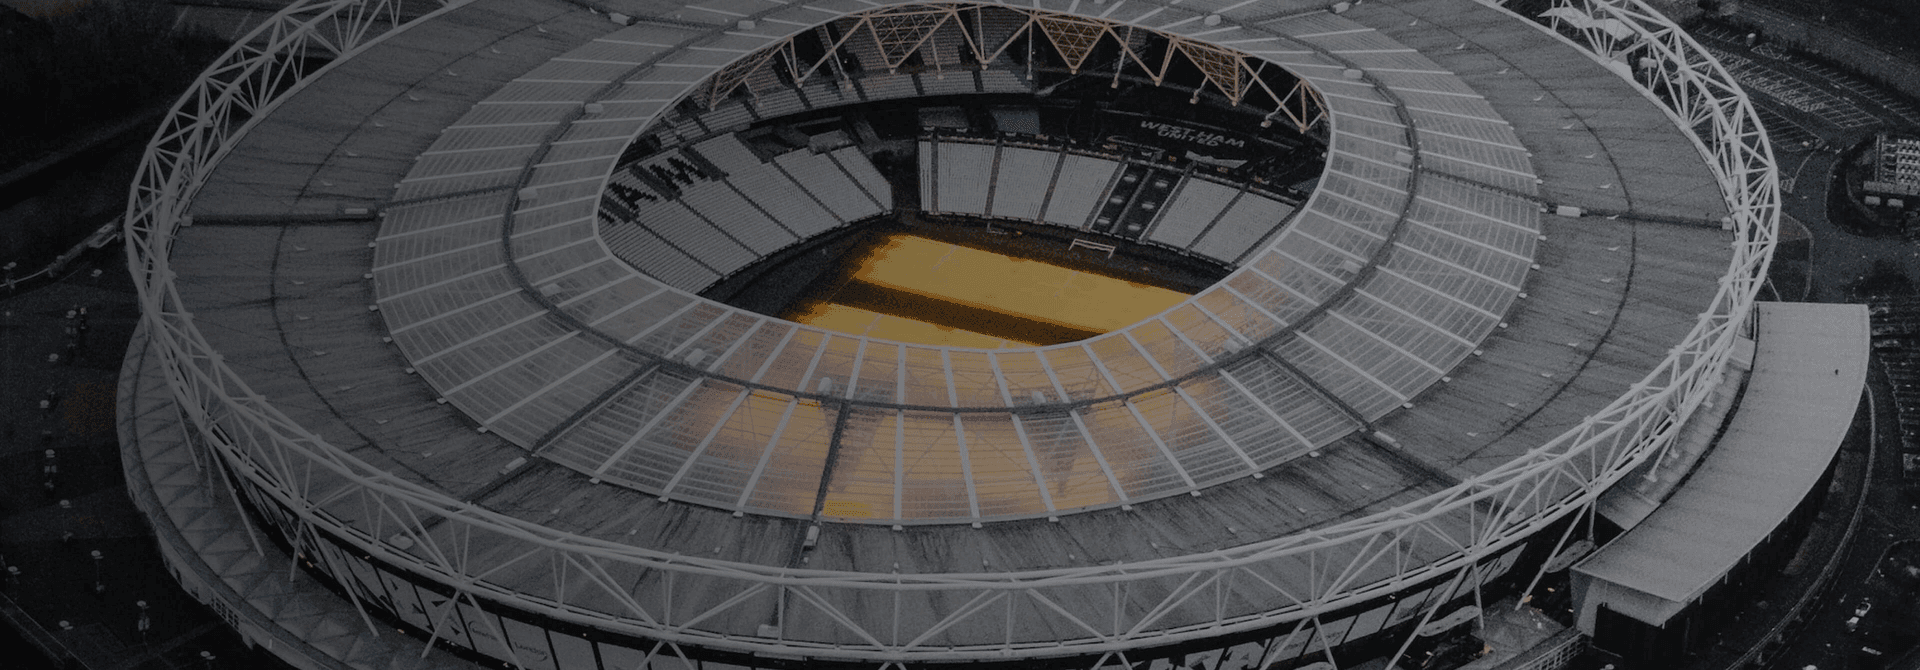 Physical Security in the Middle East:
Overview for Events and Sports Stadiums